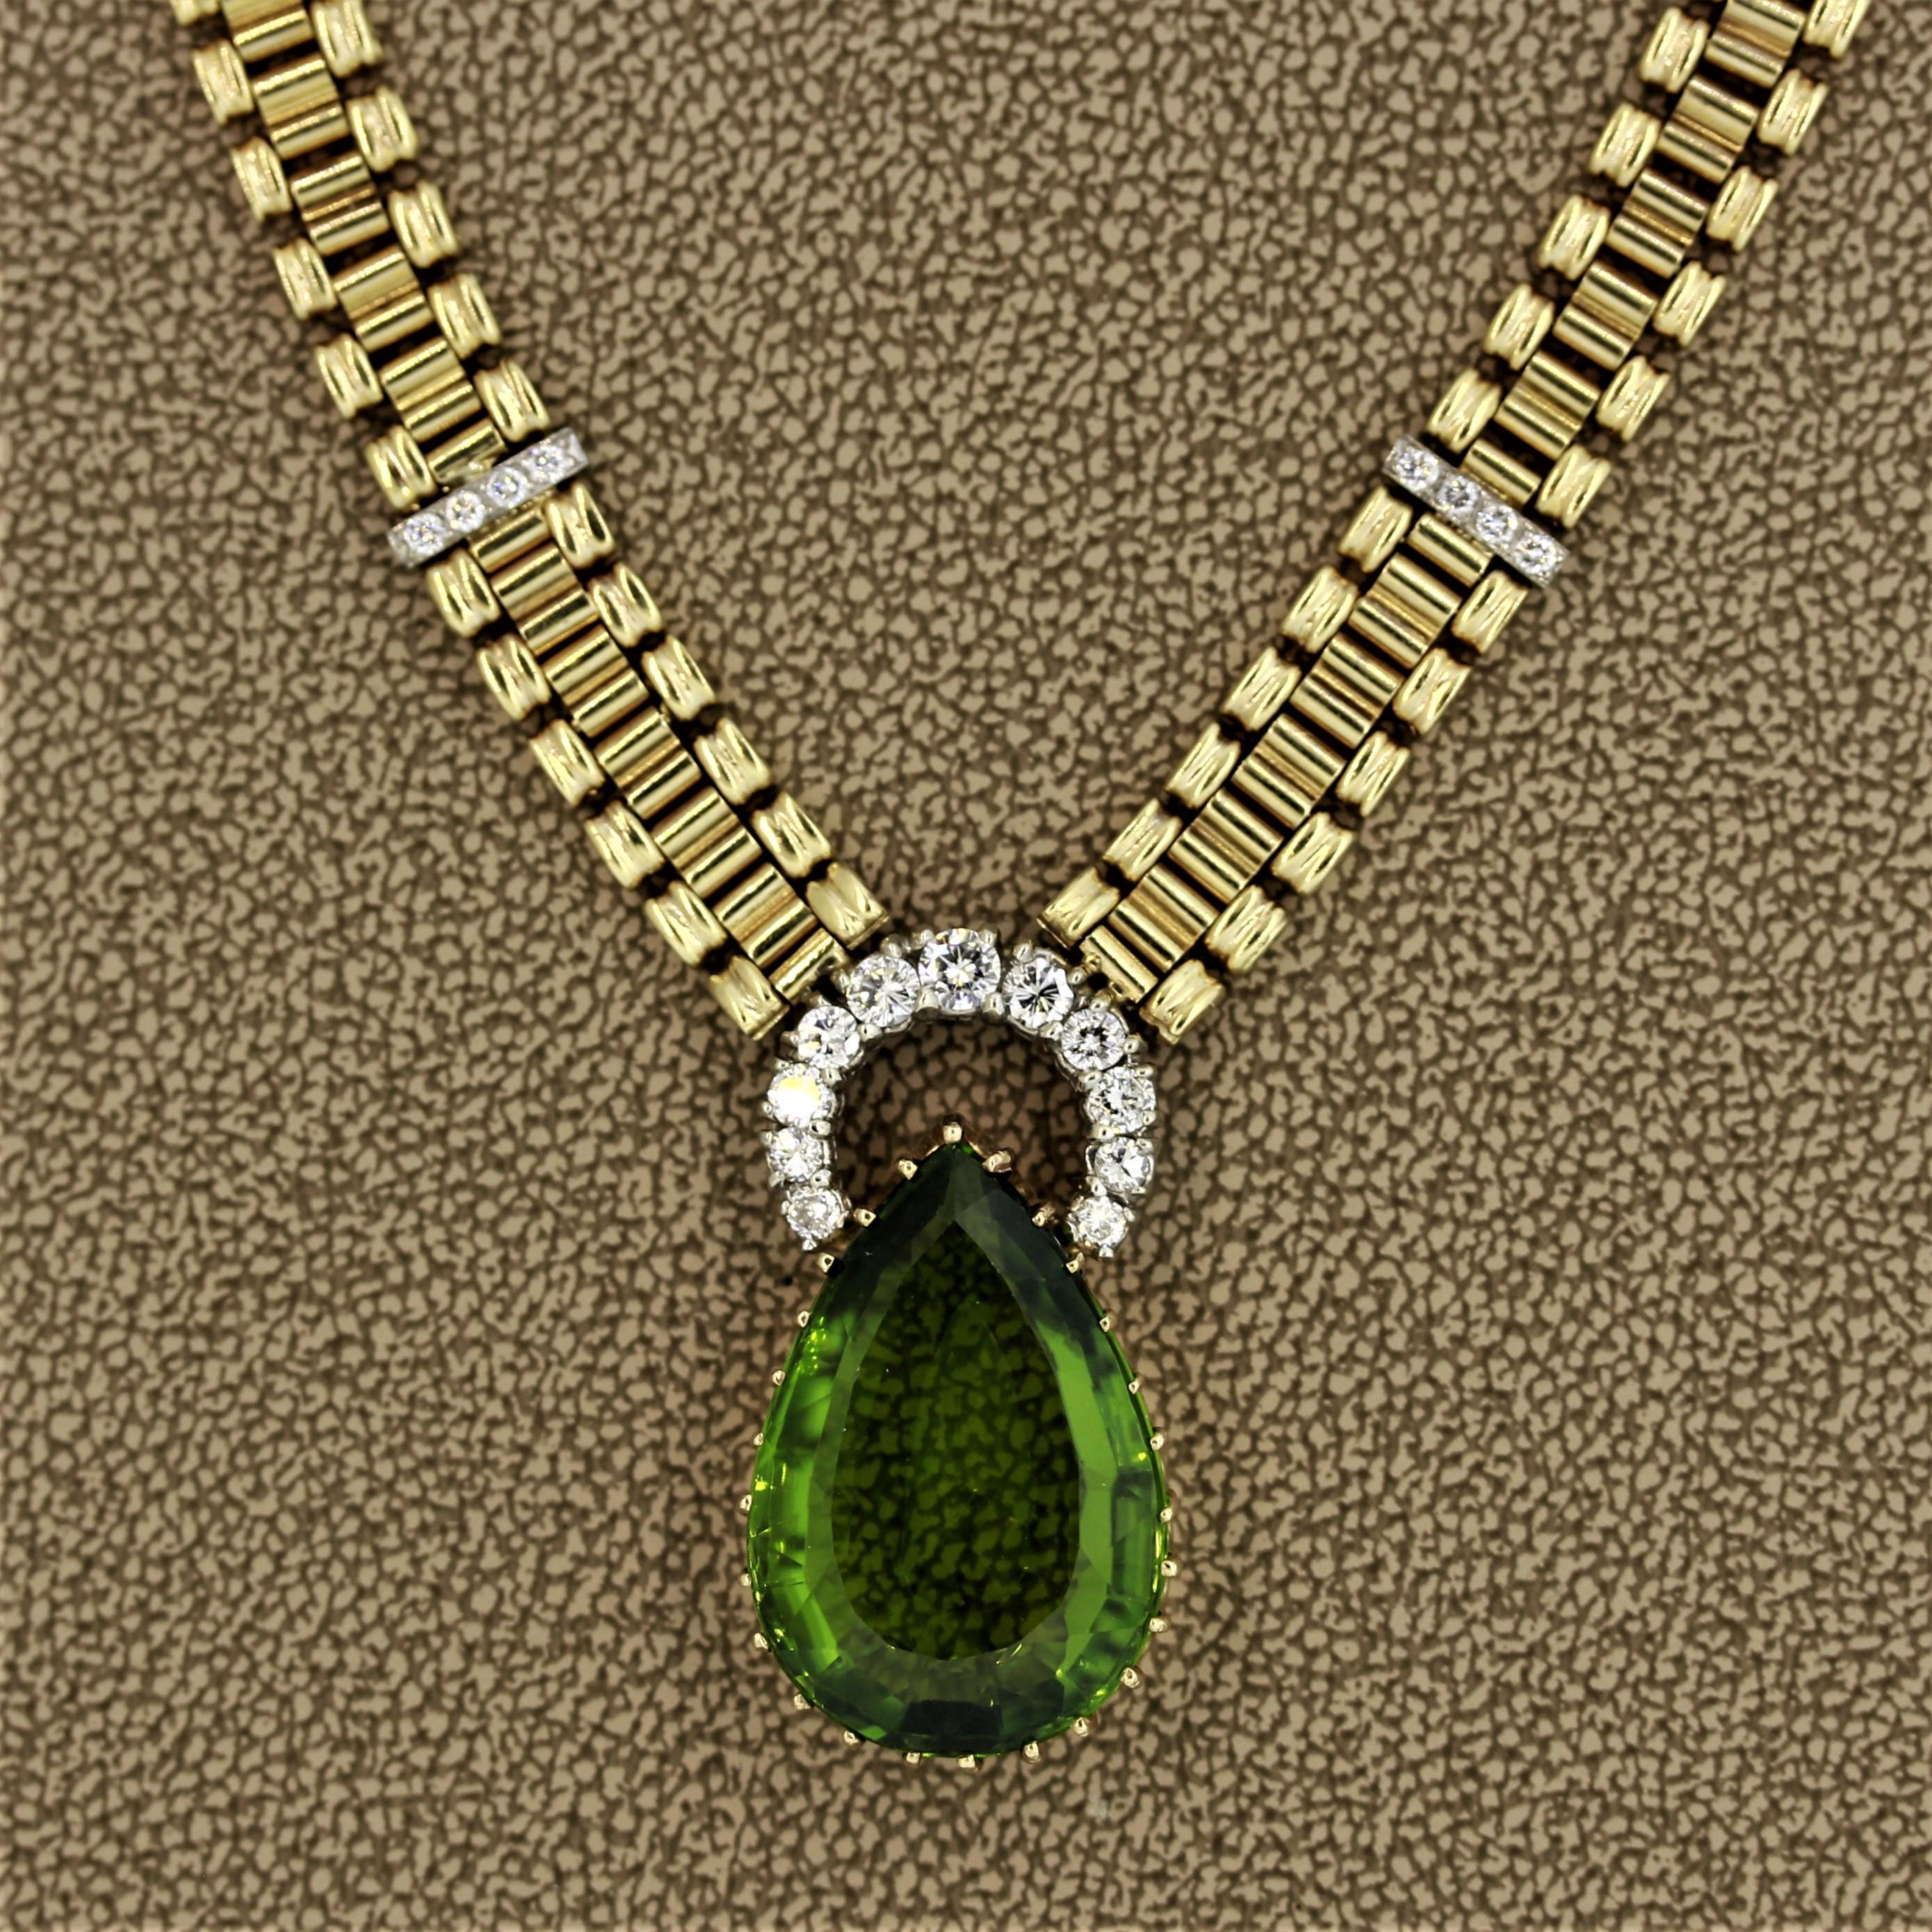 Here we have an expertly made necklace featuring a large pear shaped peridot weighing 16.45 carats. It is set in classic Victorian-era multi claw prong style. It is accented by 0.65 carats of round brilliant cut diamonds set in 14k gold. Made in